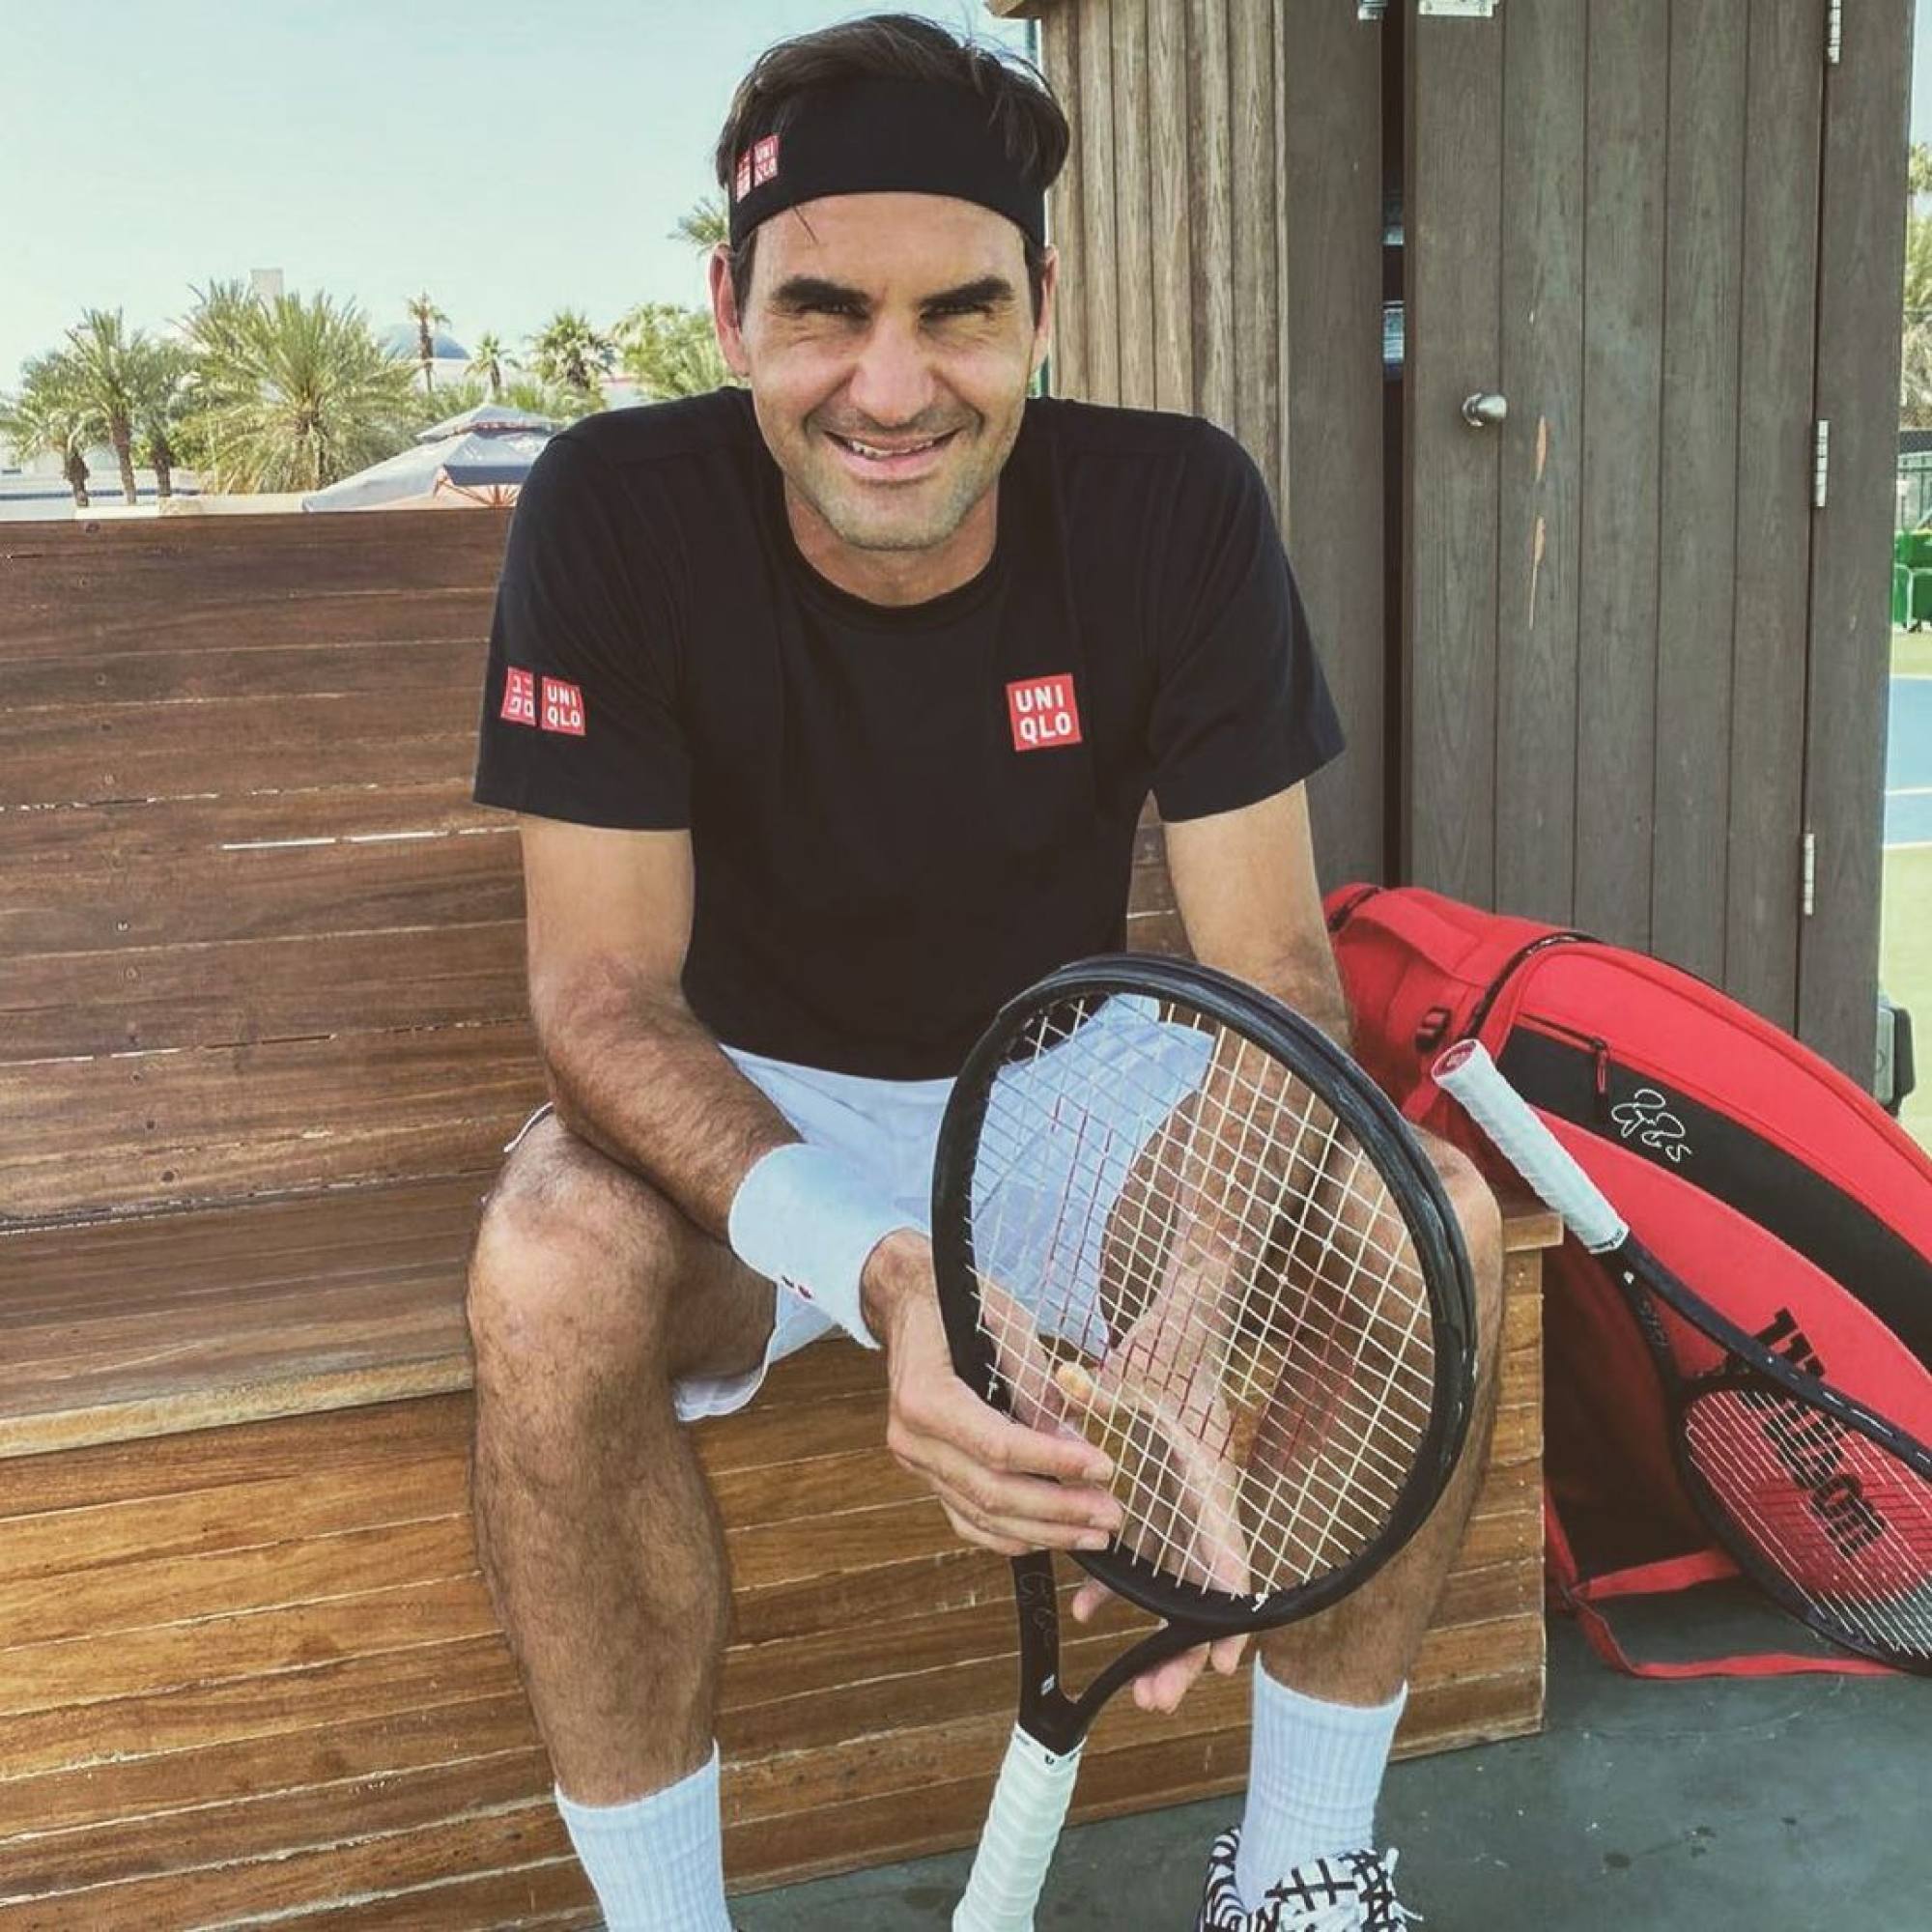 Roger Federer has been ranked the world’s best tennis player for a total of 310 weeks over his career. Photo: @rogerfederer/Instagram